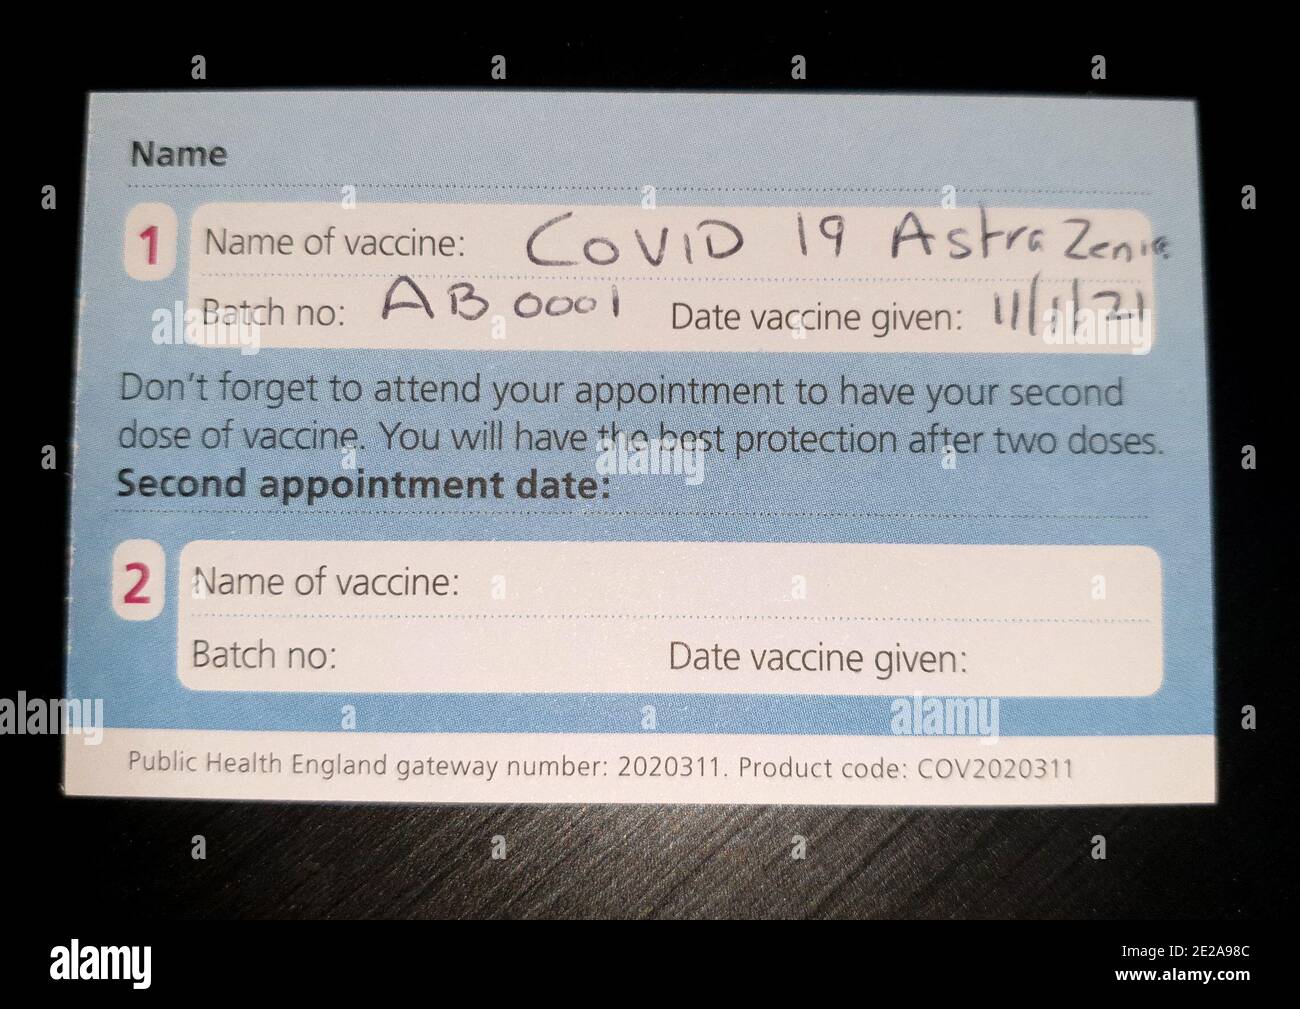 NHS Covid-19 vaccination card given out with first dose of the Astra Zeneca vaccine in the UK Stock Photo